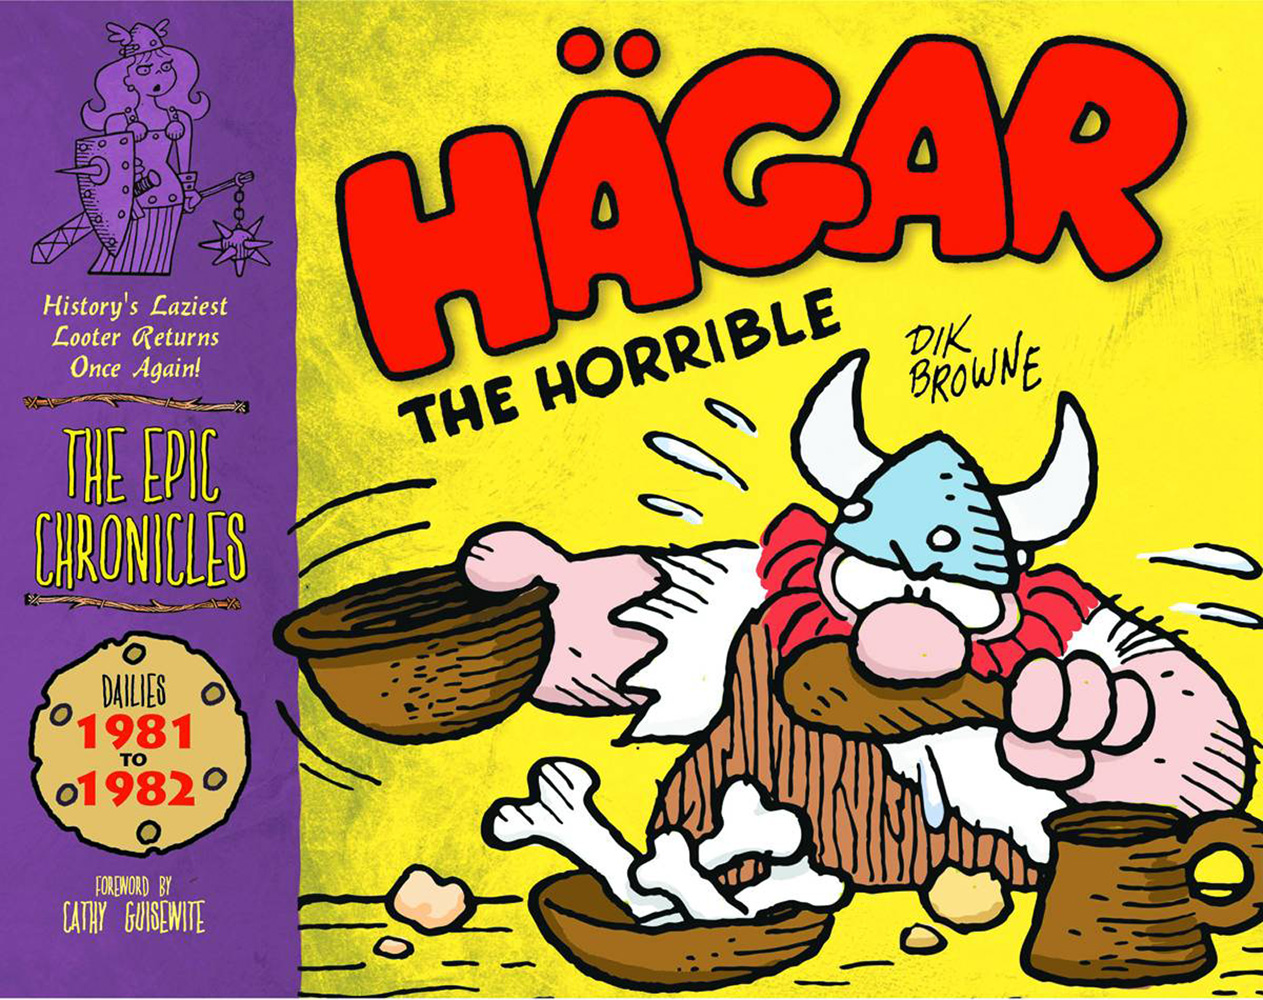 The Epic Chronicles of Hagar the Horrible Volume 7: 1981-1982